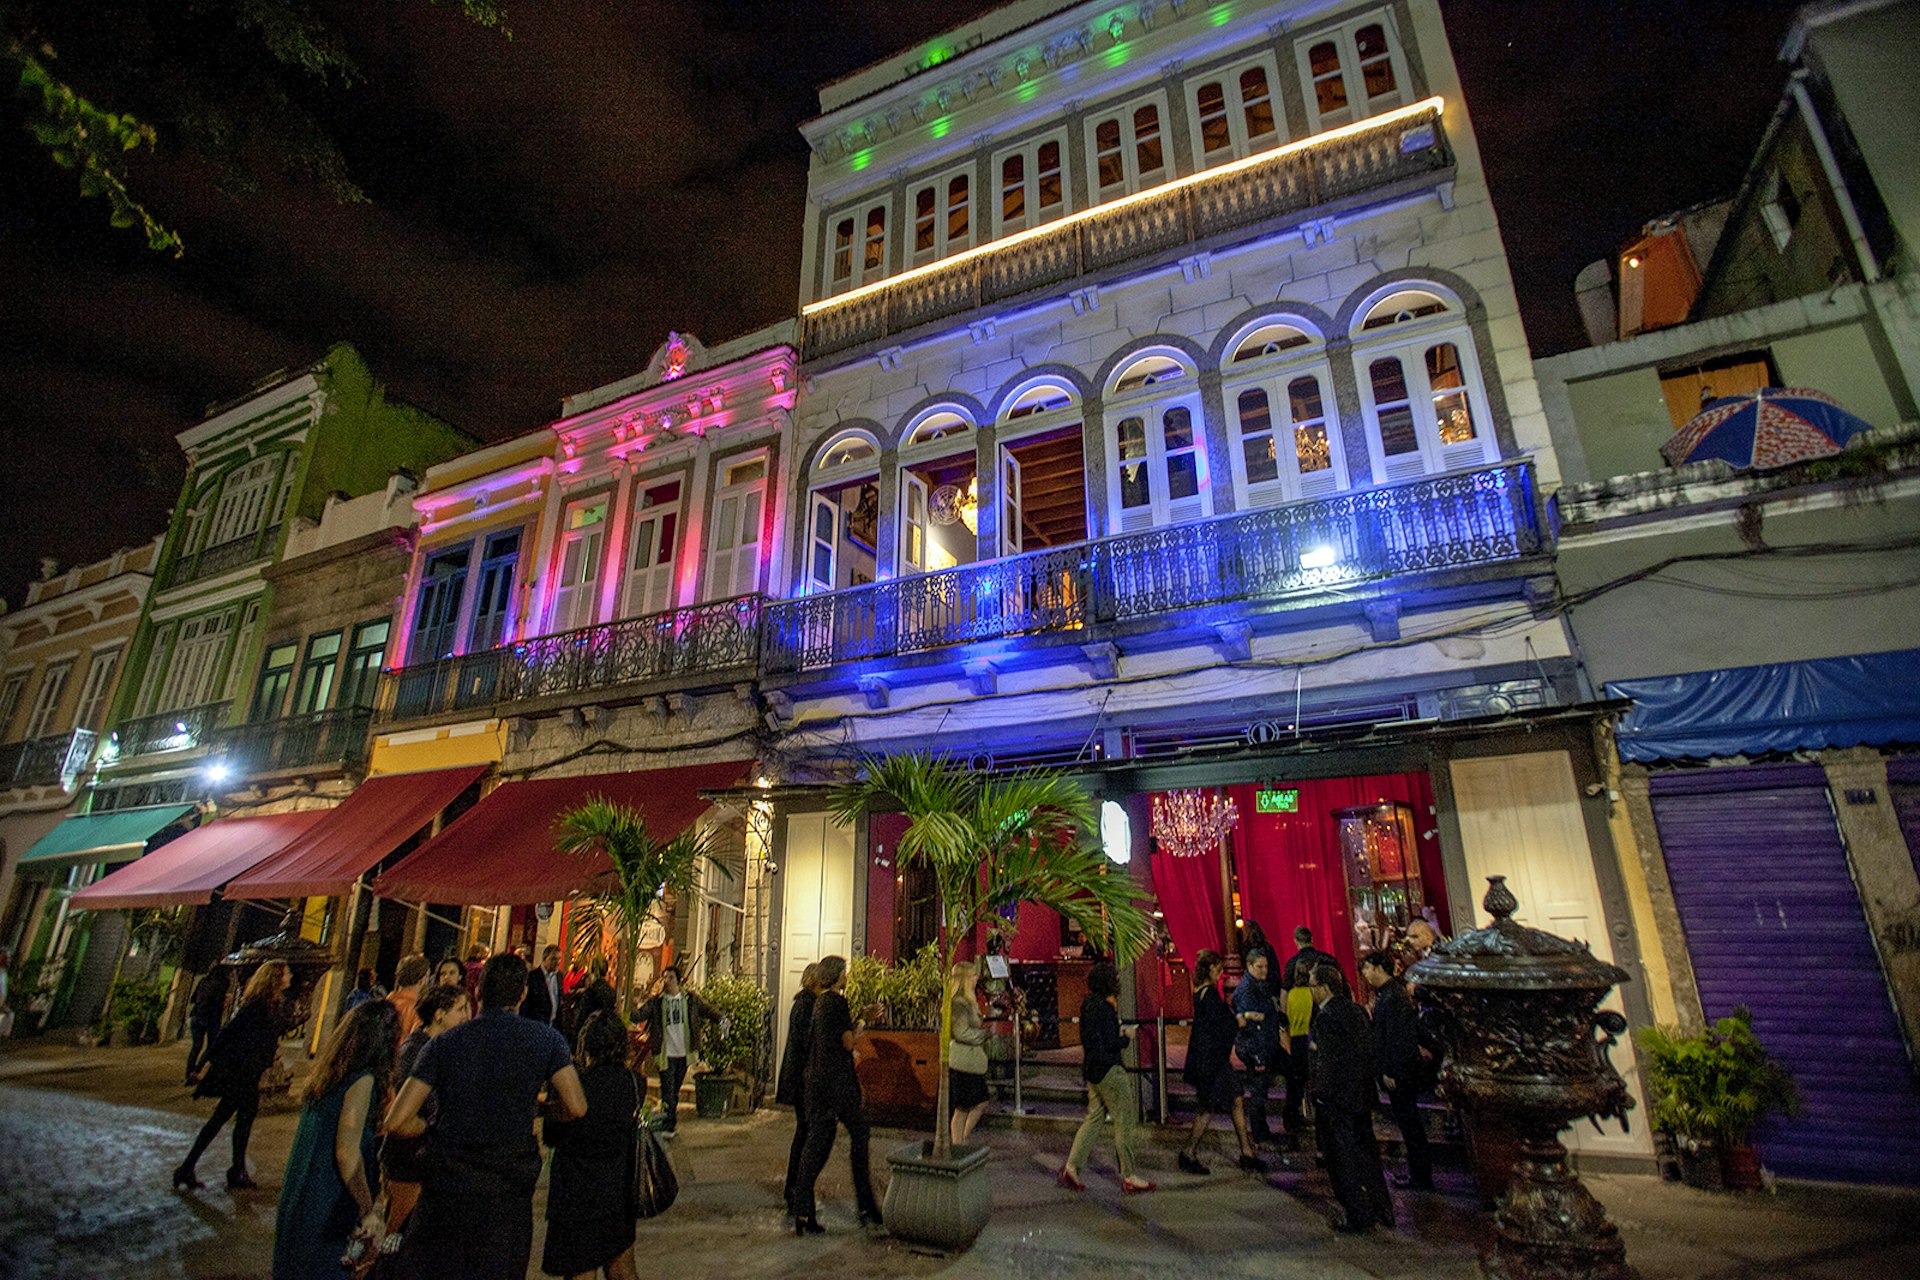 A photo of the colorful facade of Rio Scenarium lit with blue, pink and green lights, as revelers walk towards the front entrance